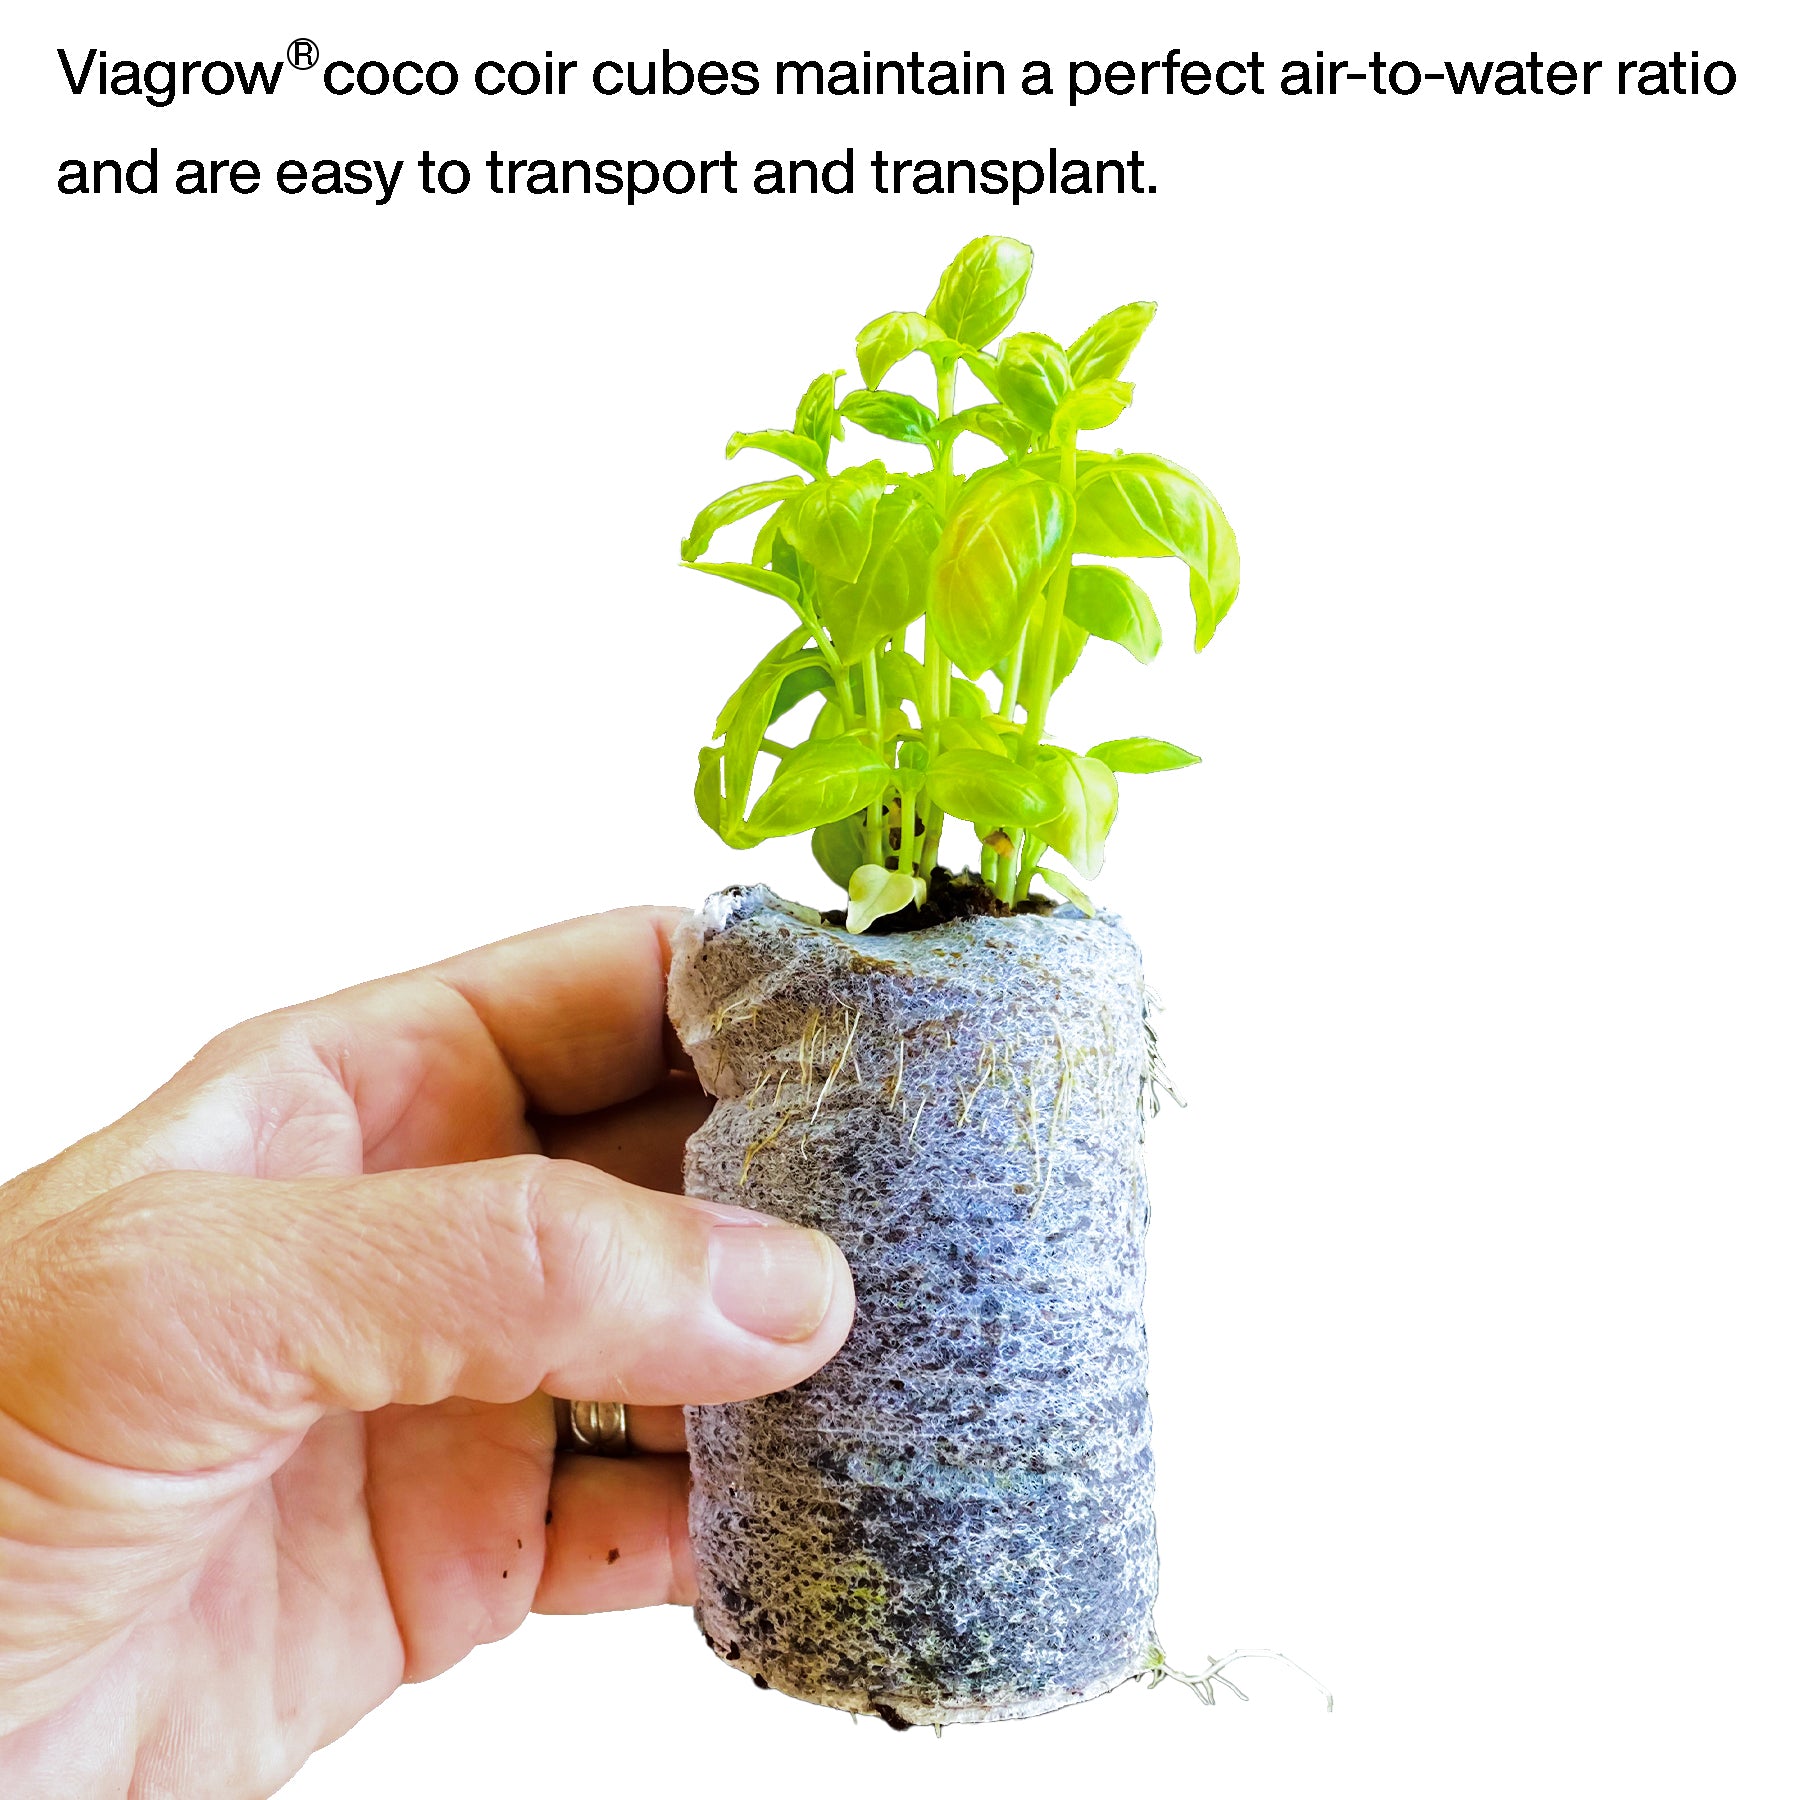 Viagrow Coco Coir Seed Starter Plugs, 50mm, 50-Pack, (Case of 14 Units)